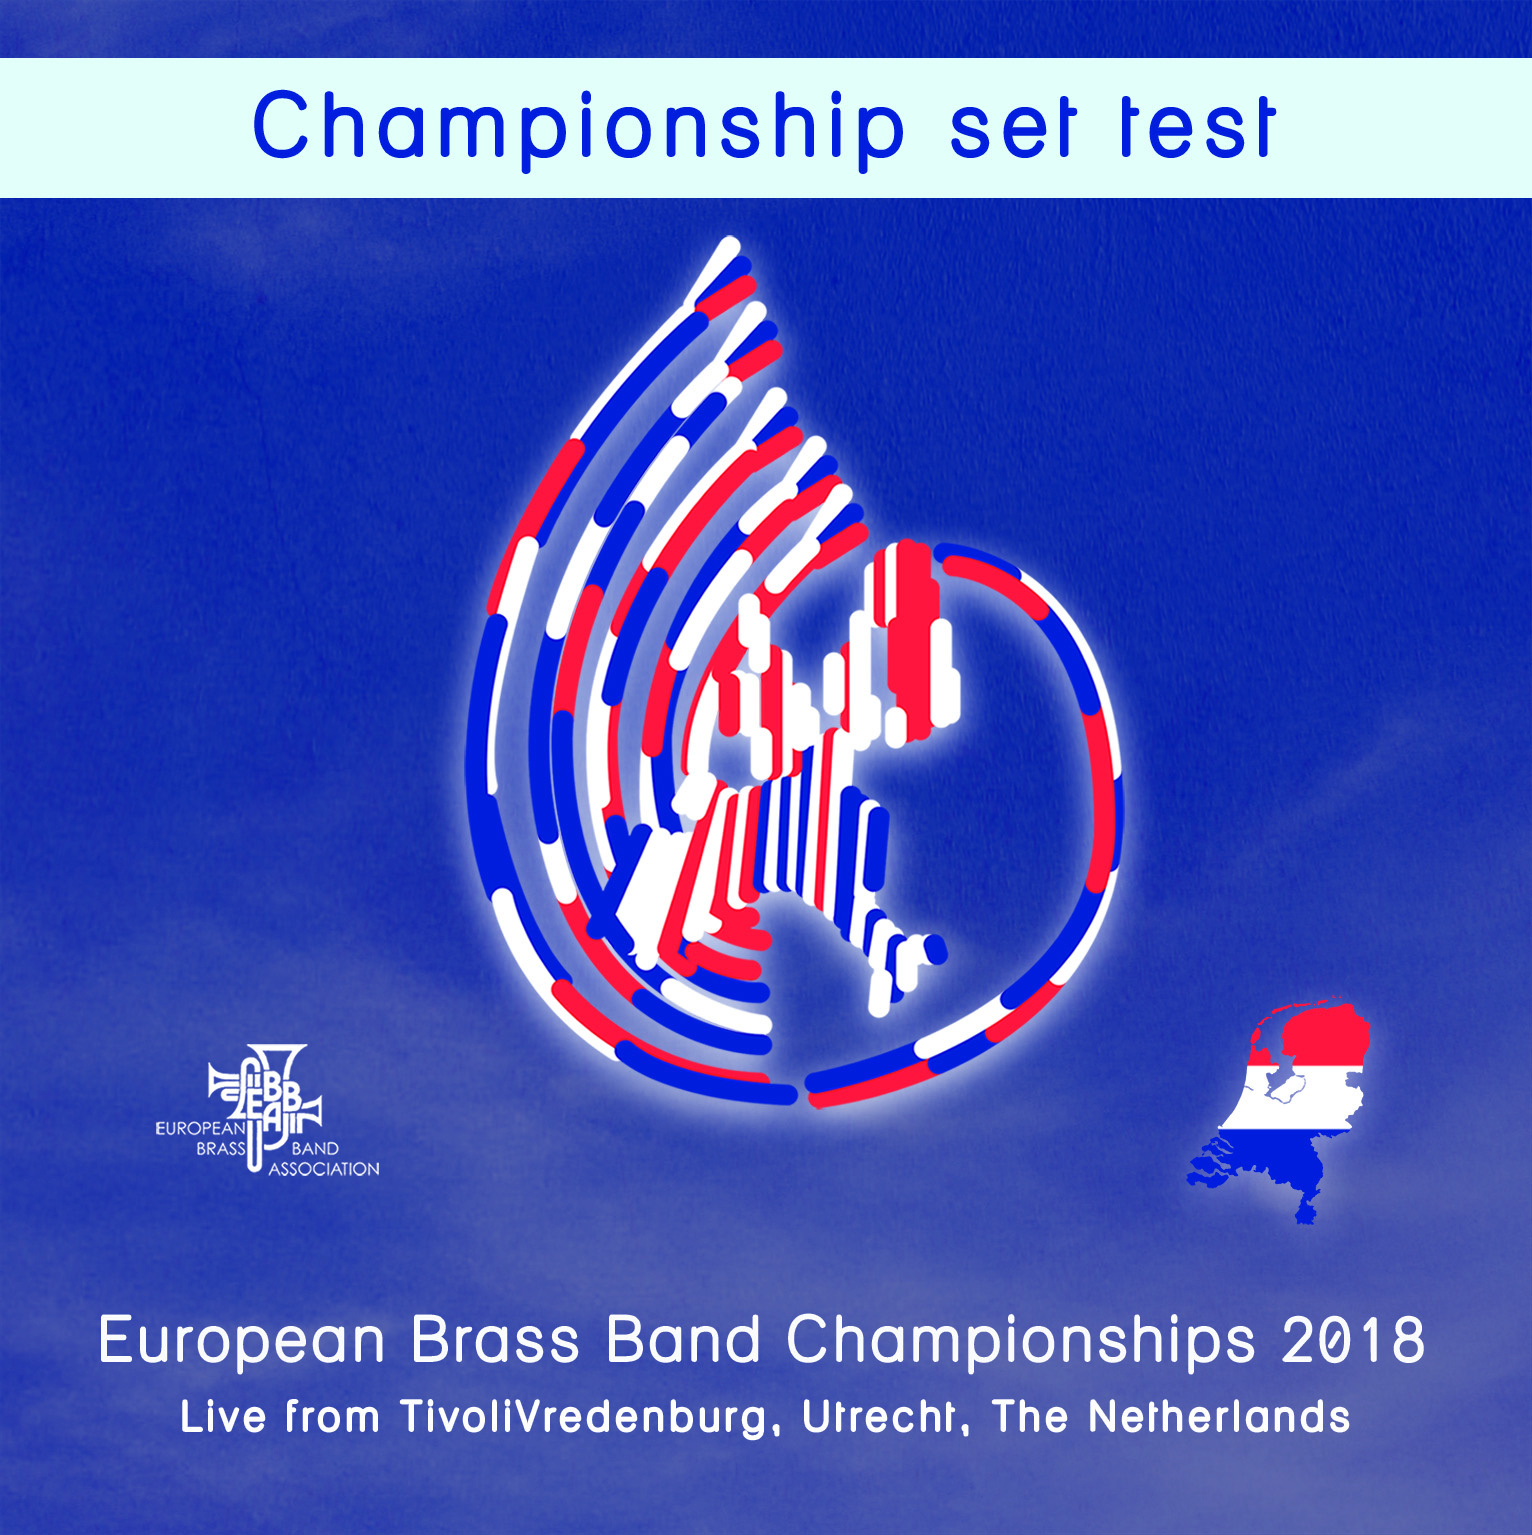 European Brass Band Championships 2018 - Championship Section Set Test - Download